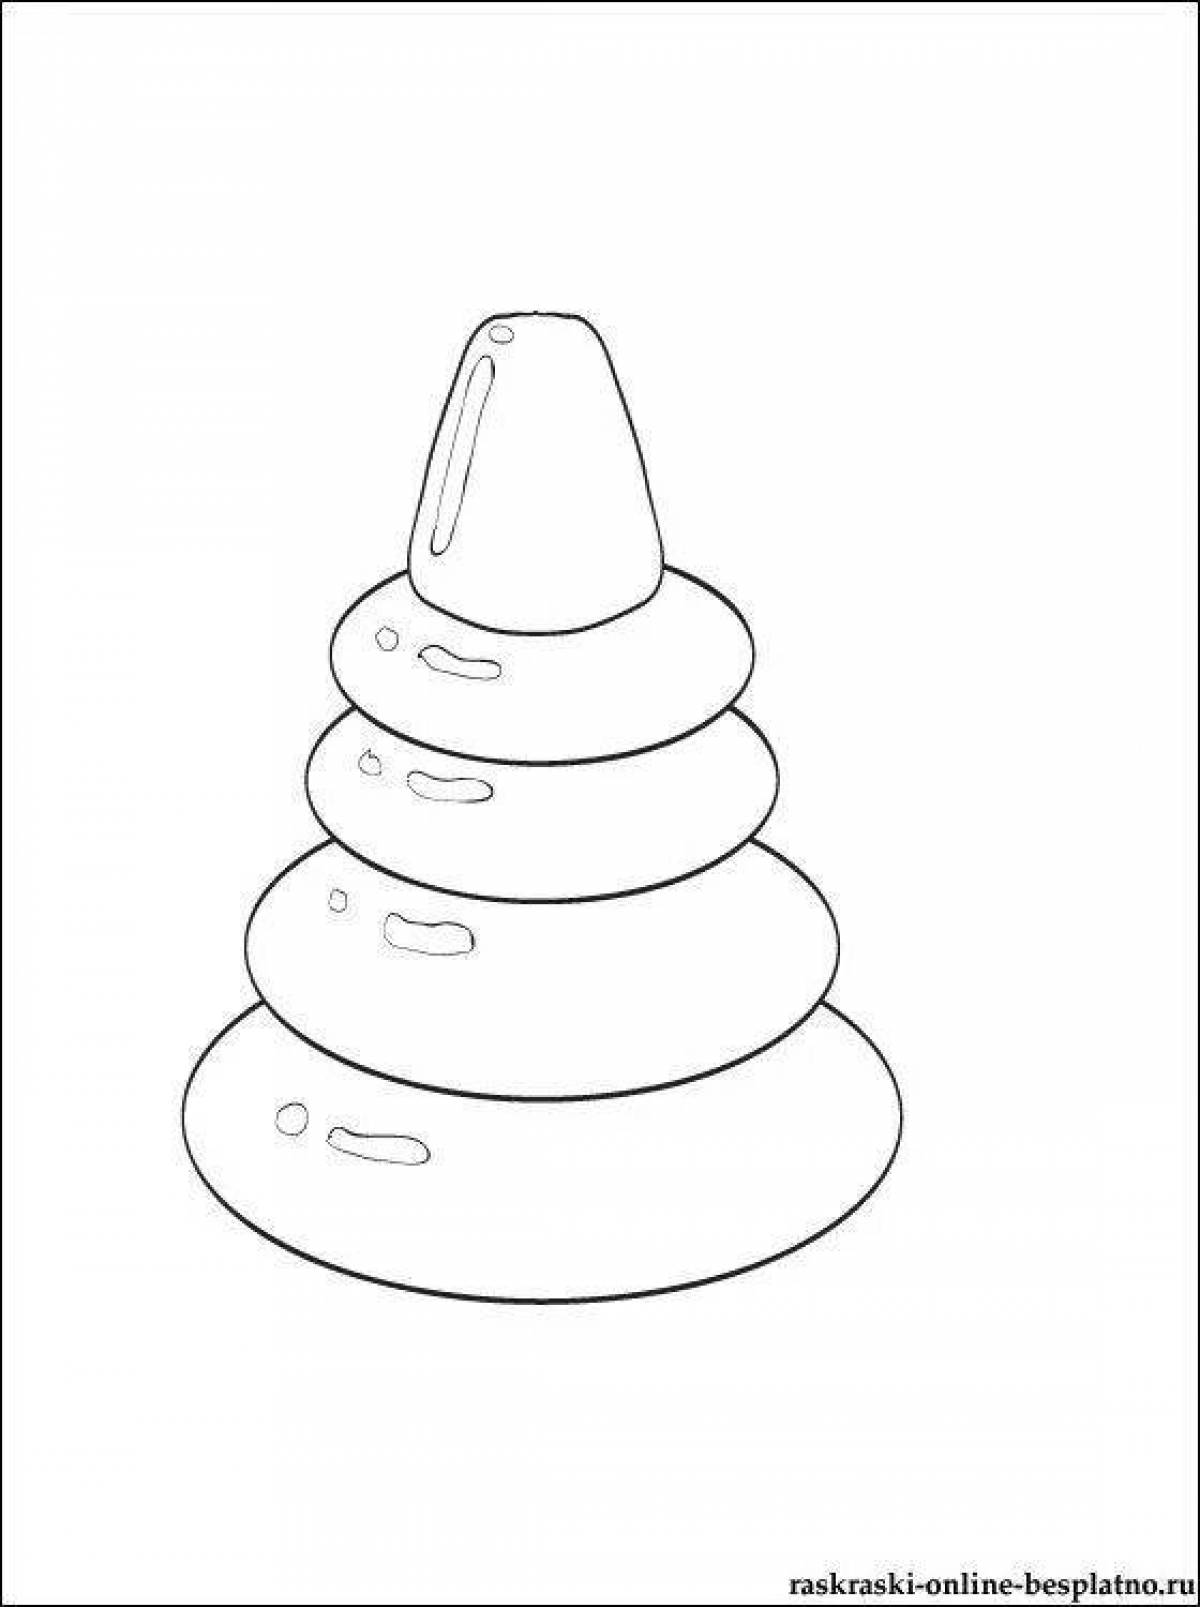 Coloring pyramid for children